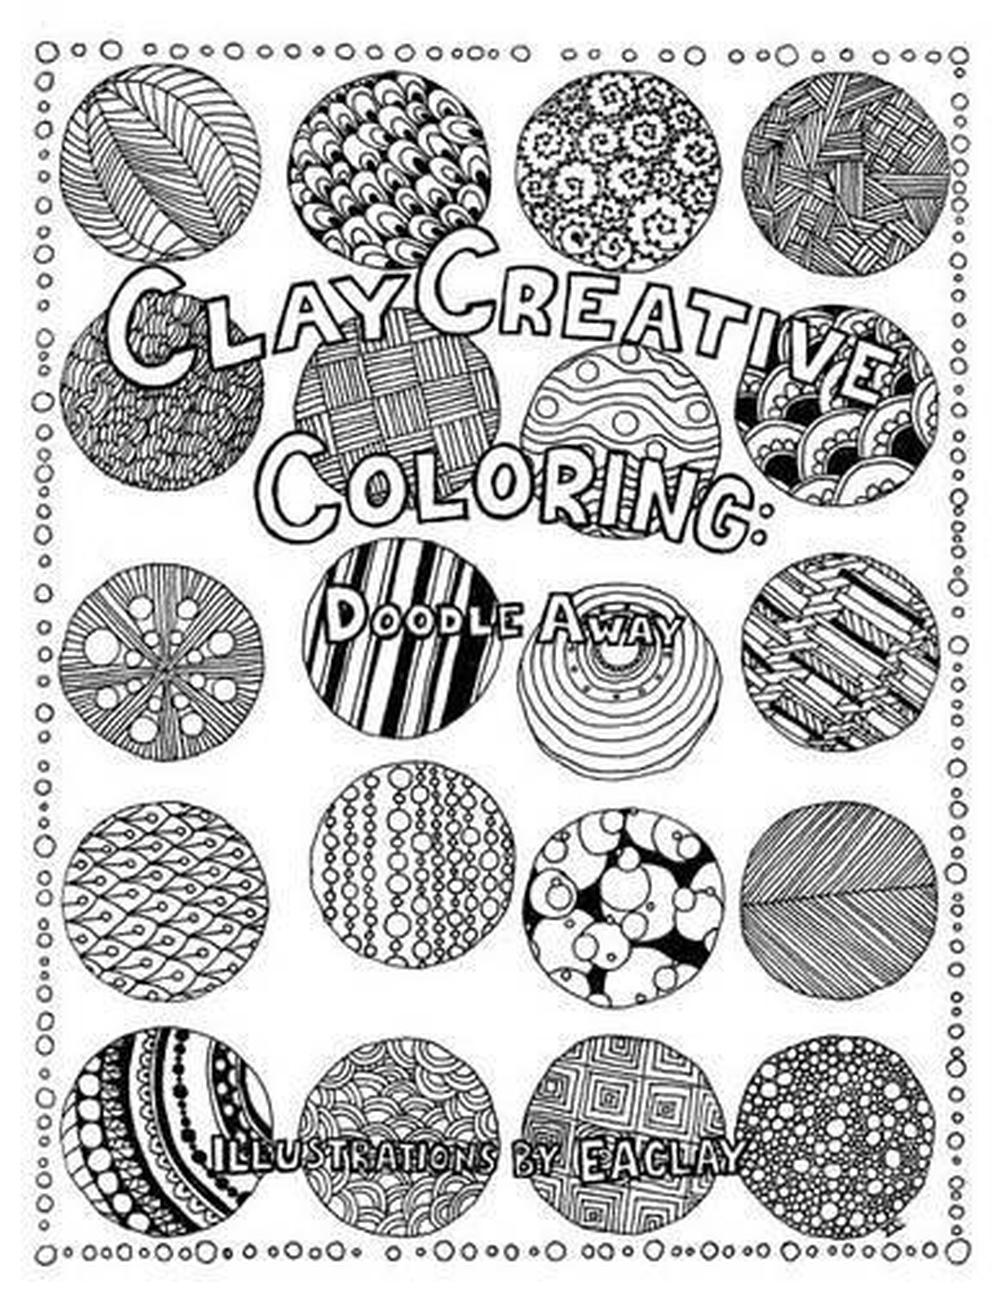 Clay Creative Coloring: Doodle Away by Eaclay (English) Paperback Book ...